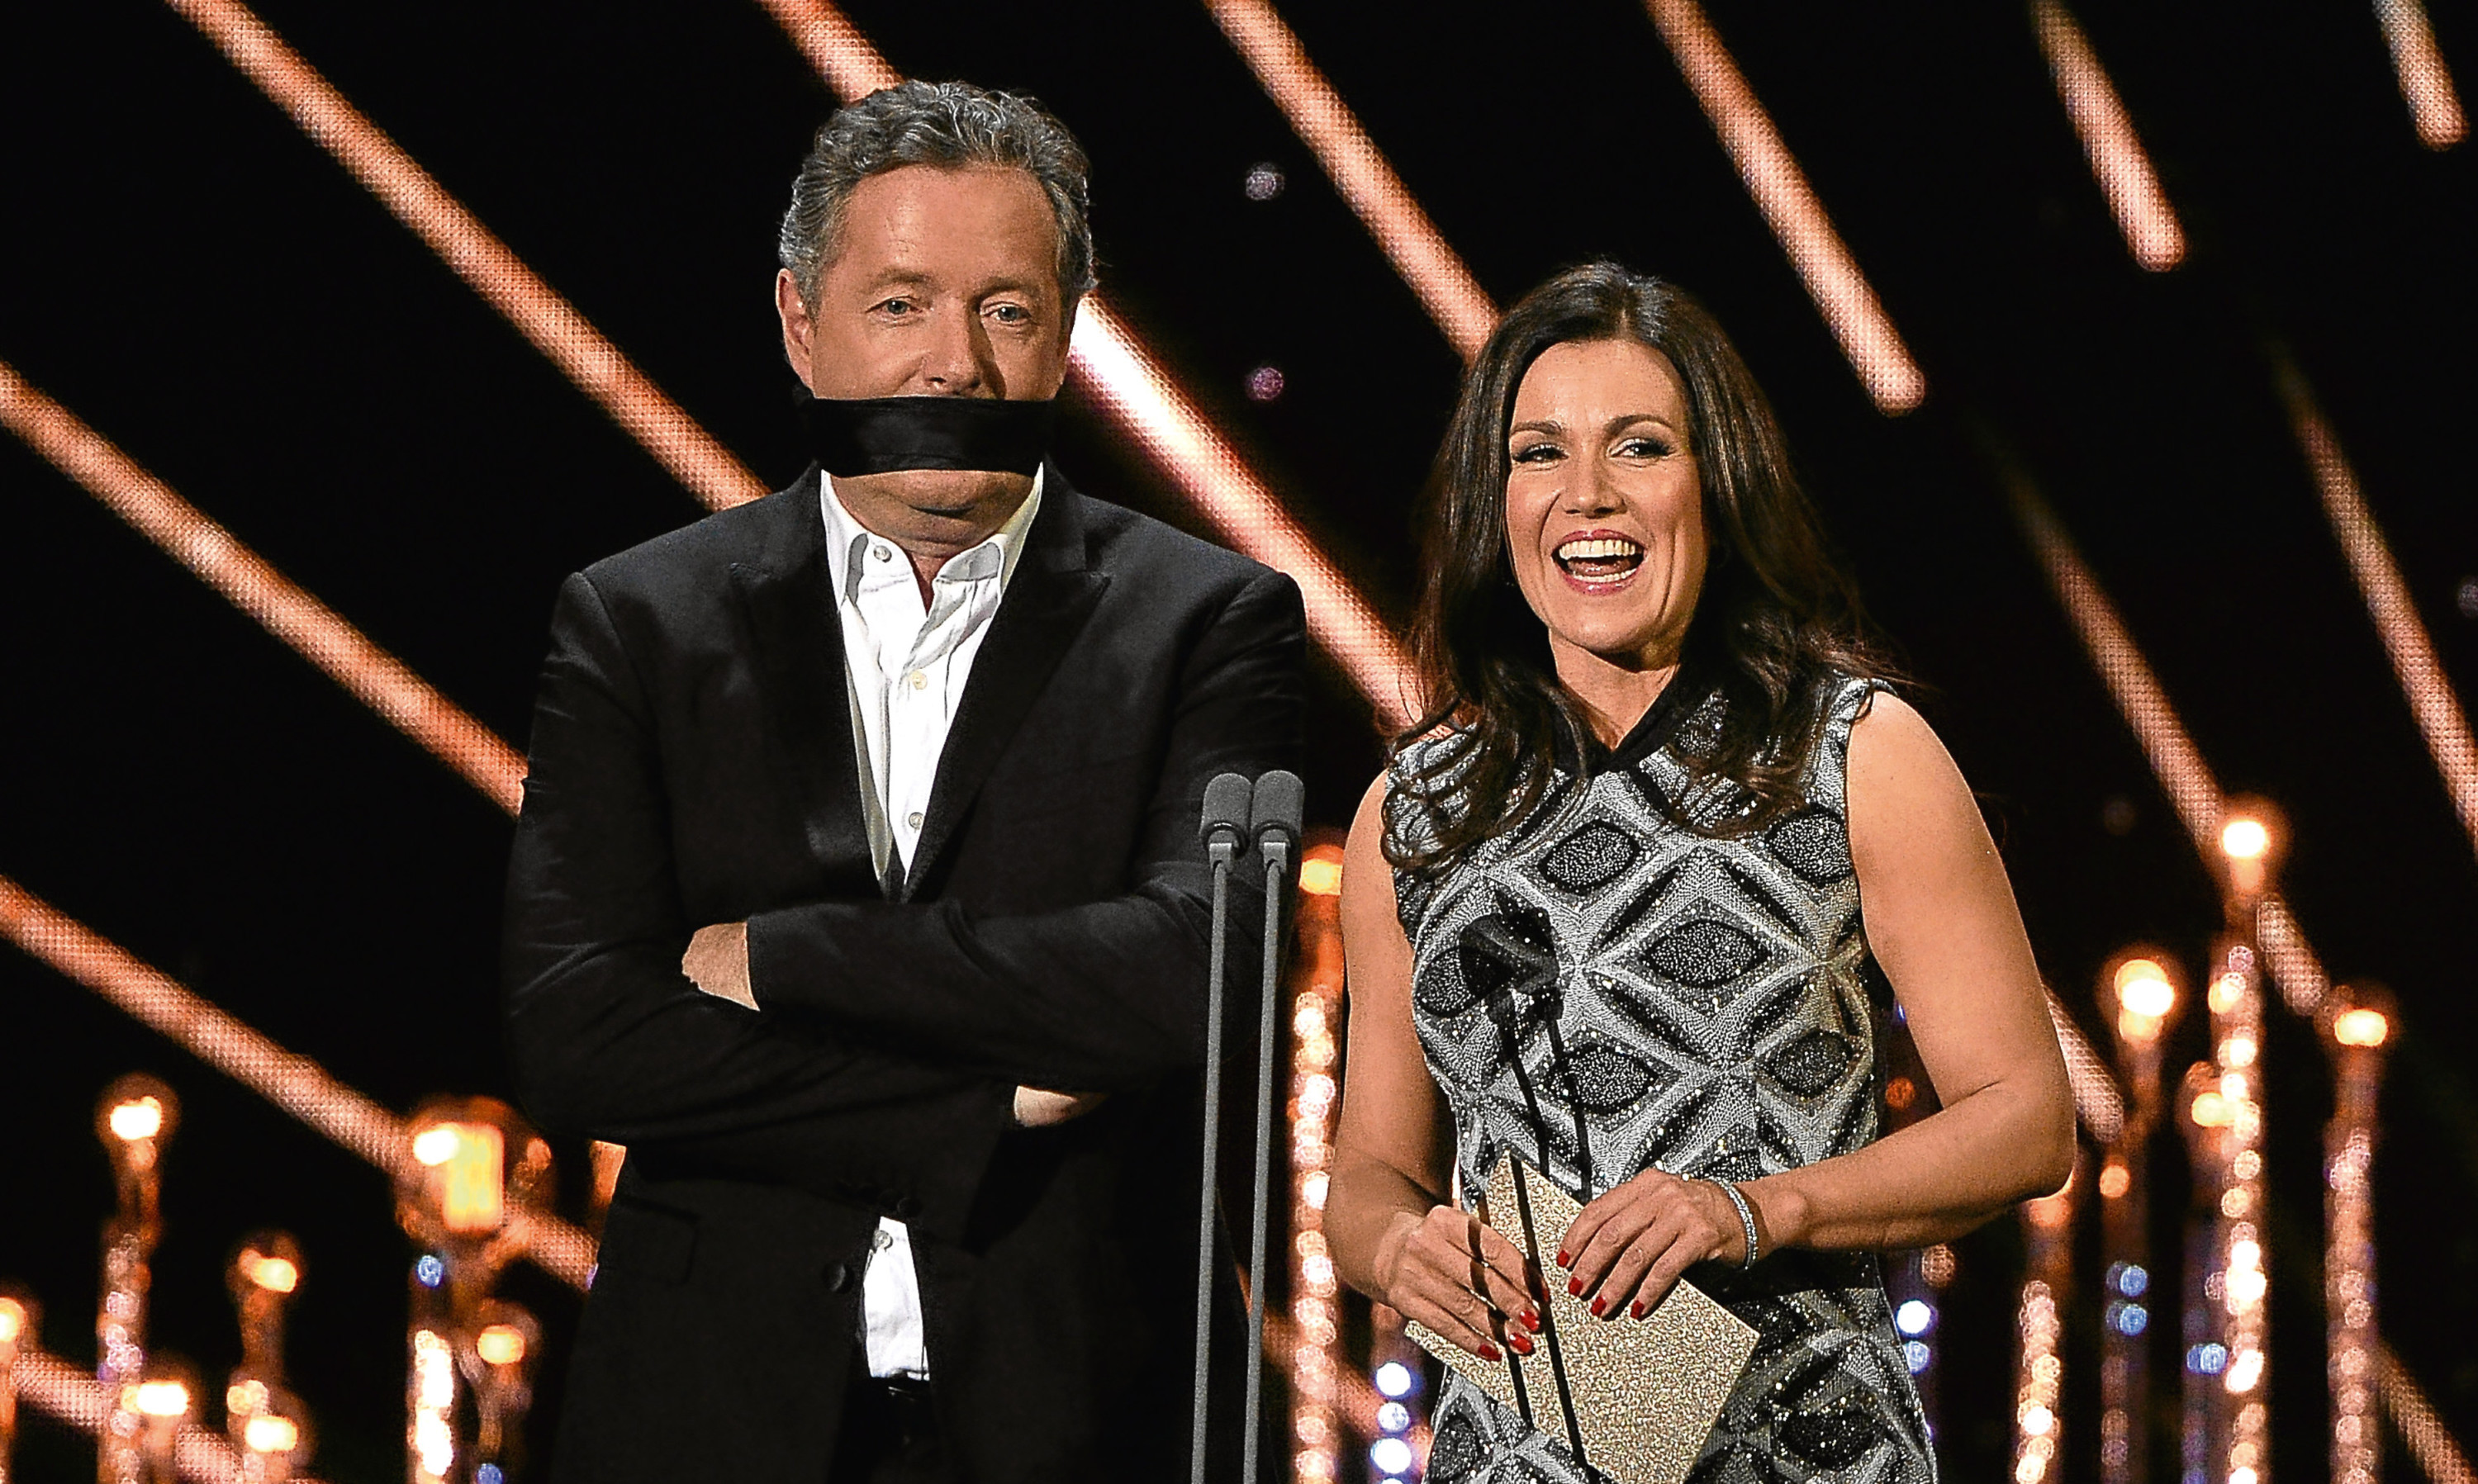 Piers Morgan and Susanna Reid on stage during the National Television Awards, which was followed by people passing cruel judgements on some of the outfits worn.